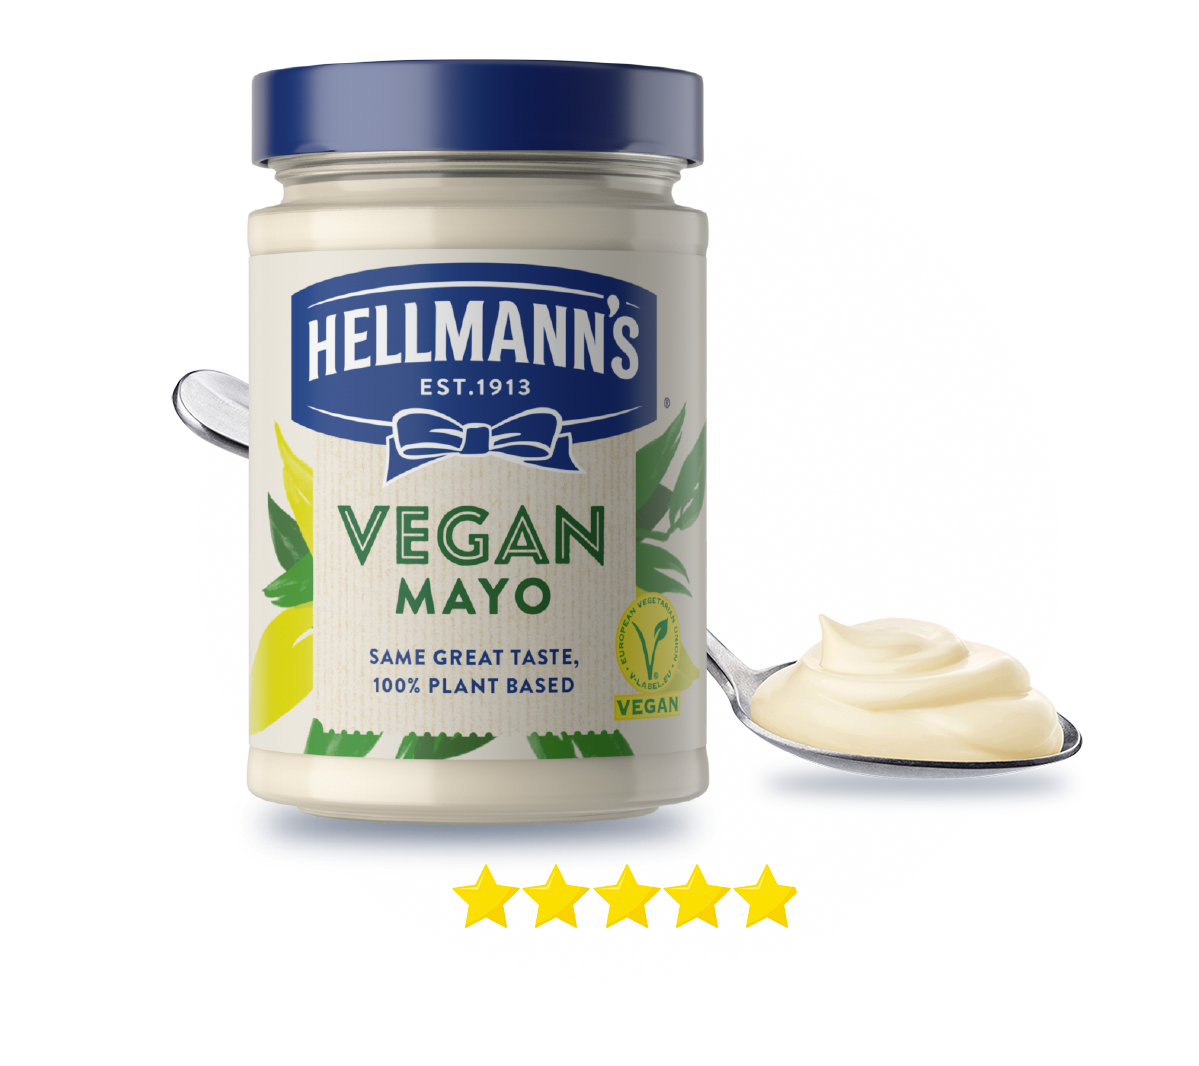 Hellmann's Vegan Mayo Packshot with mayo on a spoon